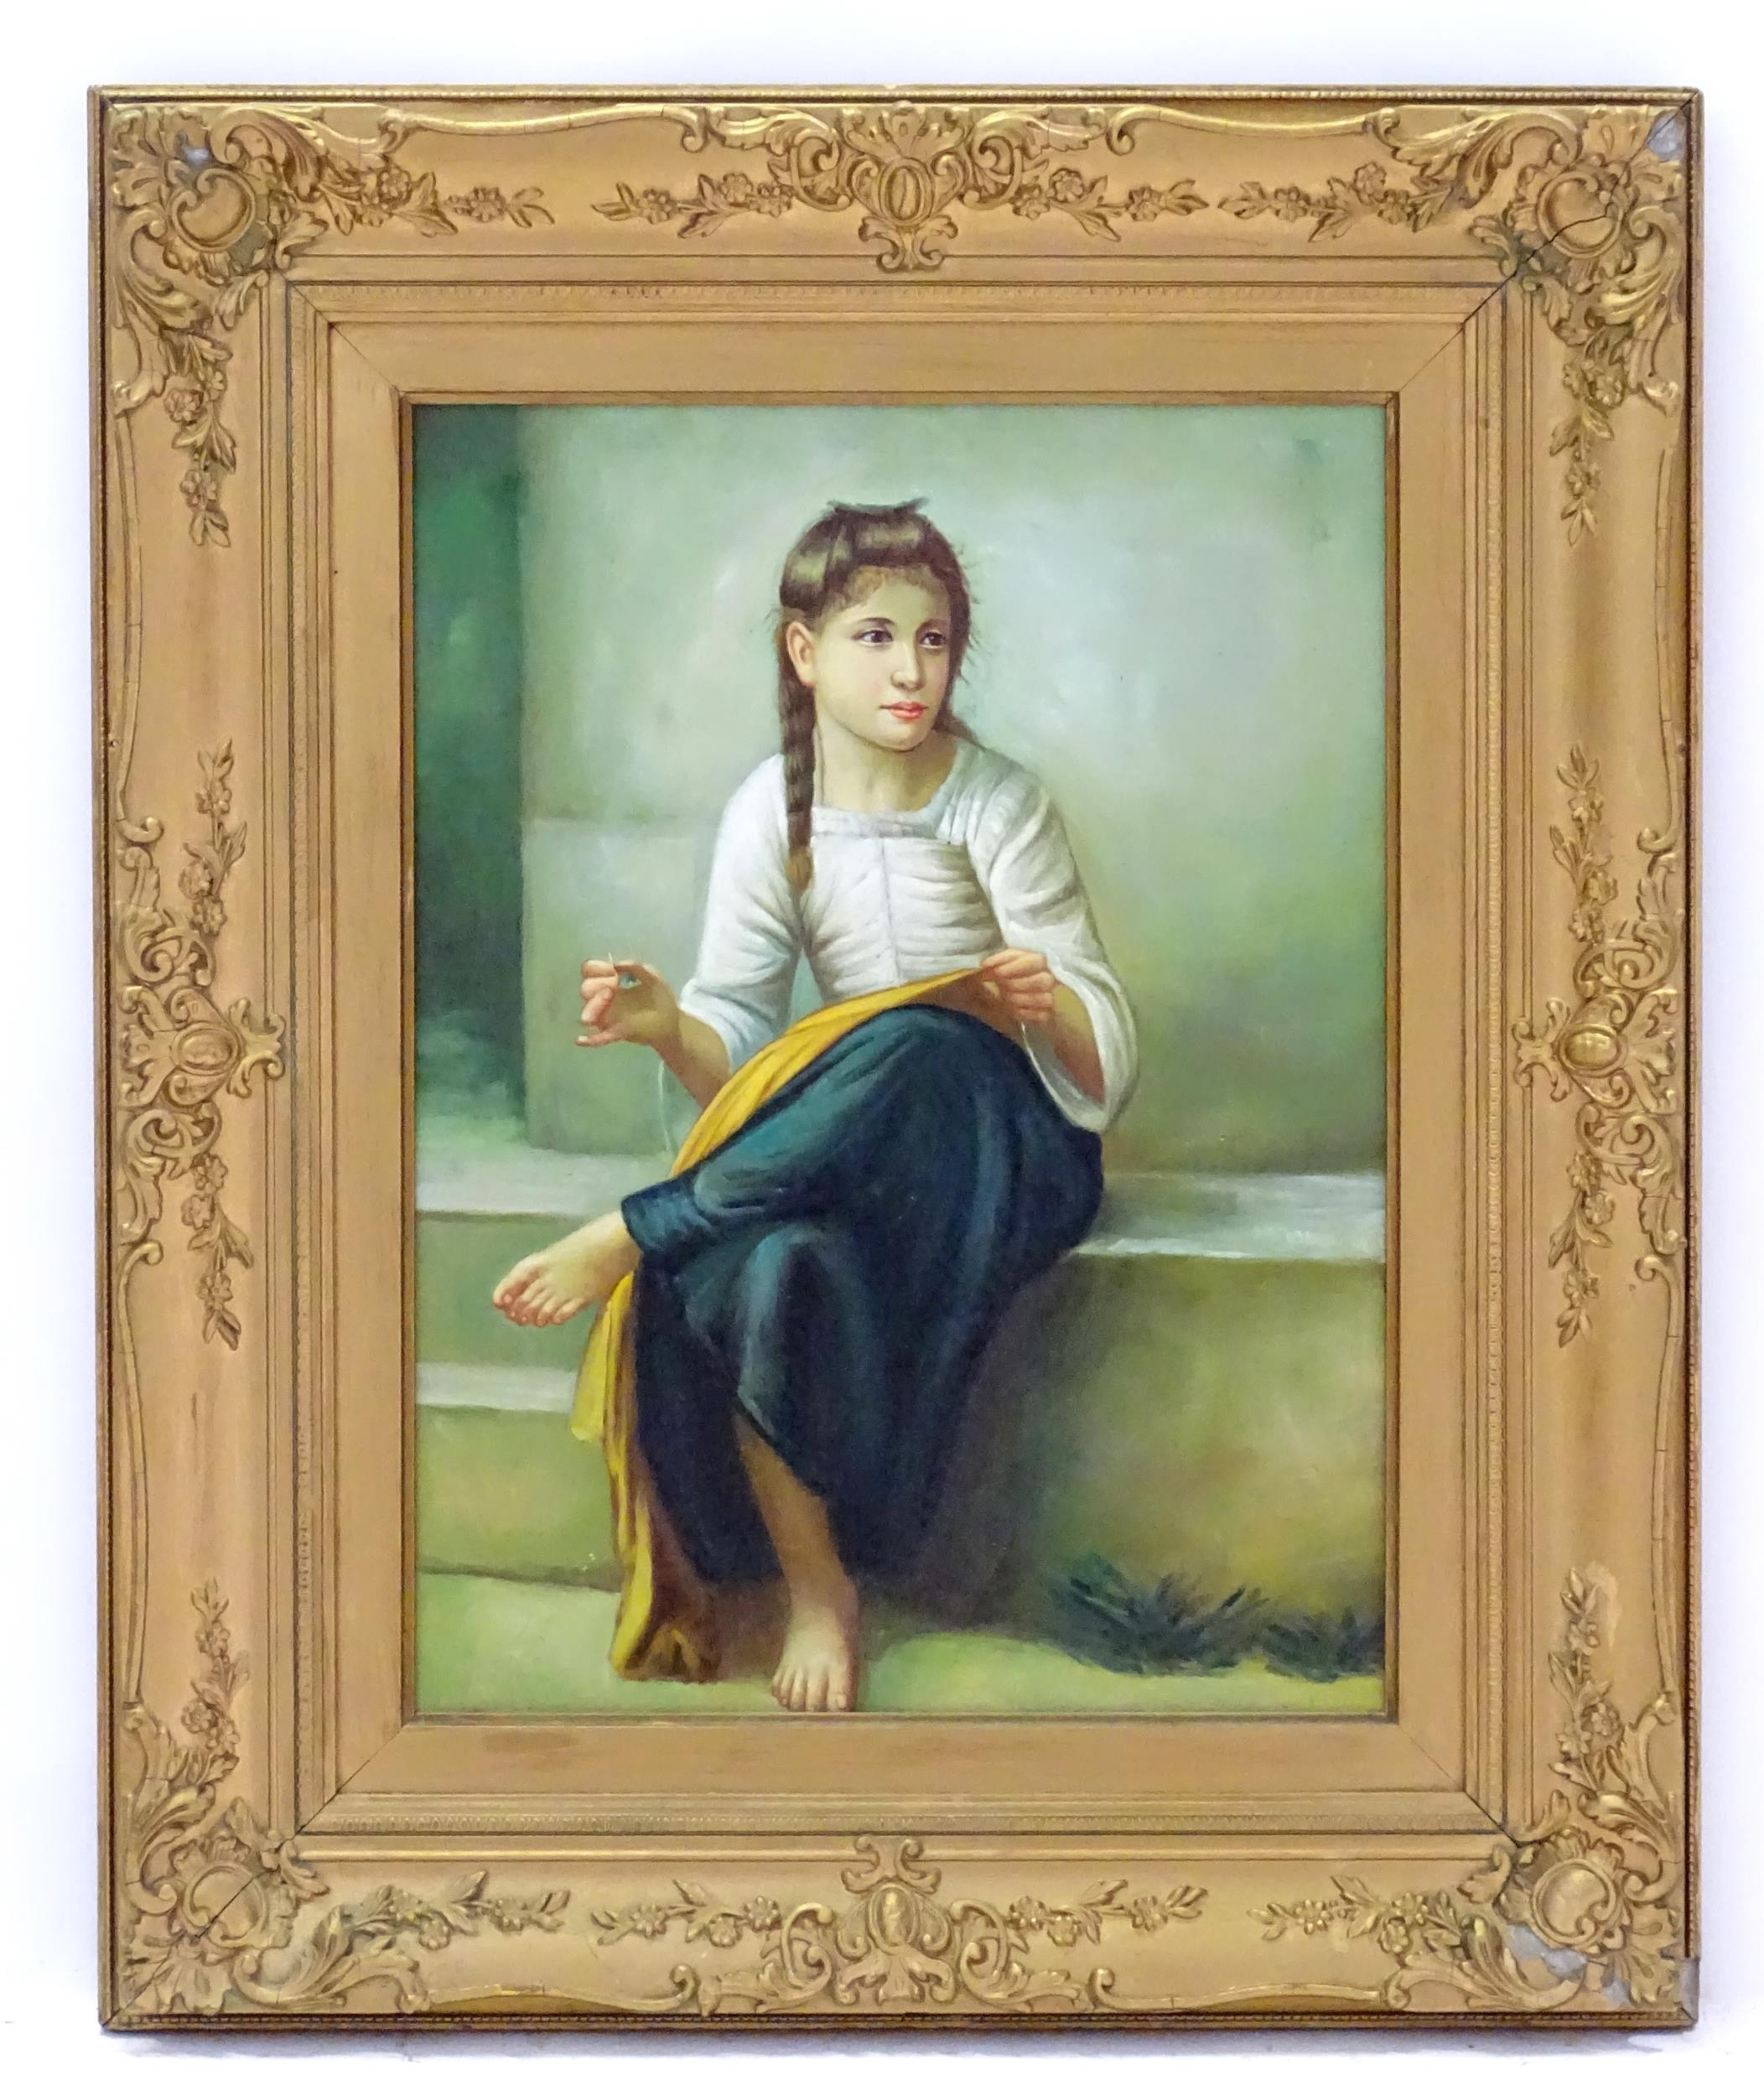 A portrait of a young girl by William Adolphe Bouguereau, 20th century